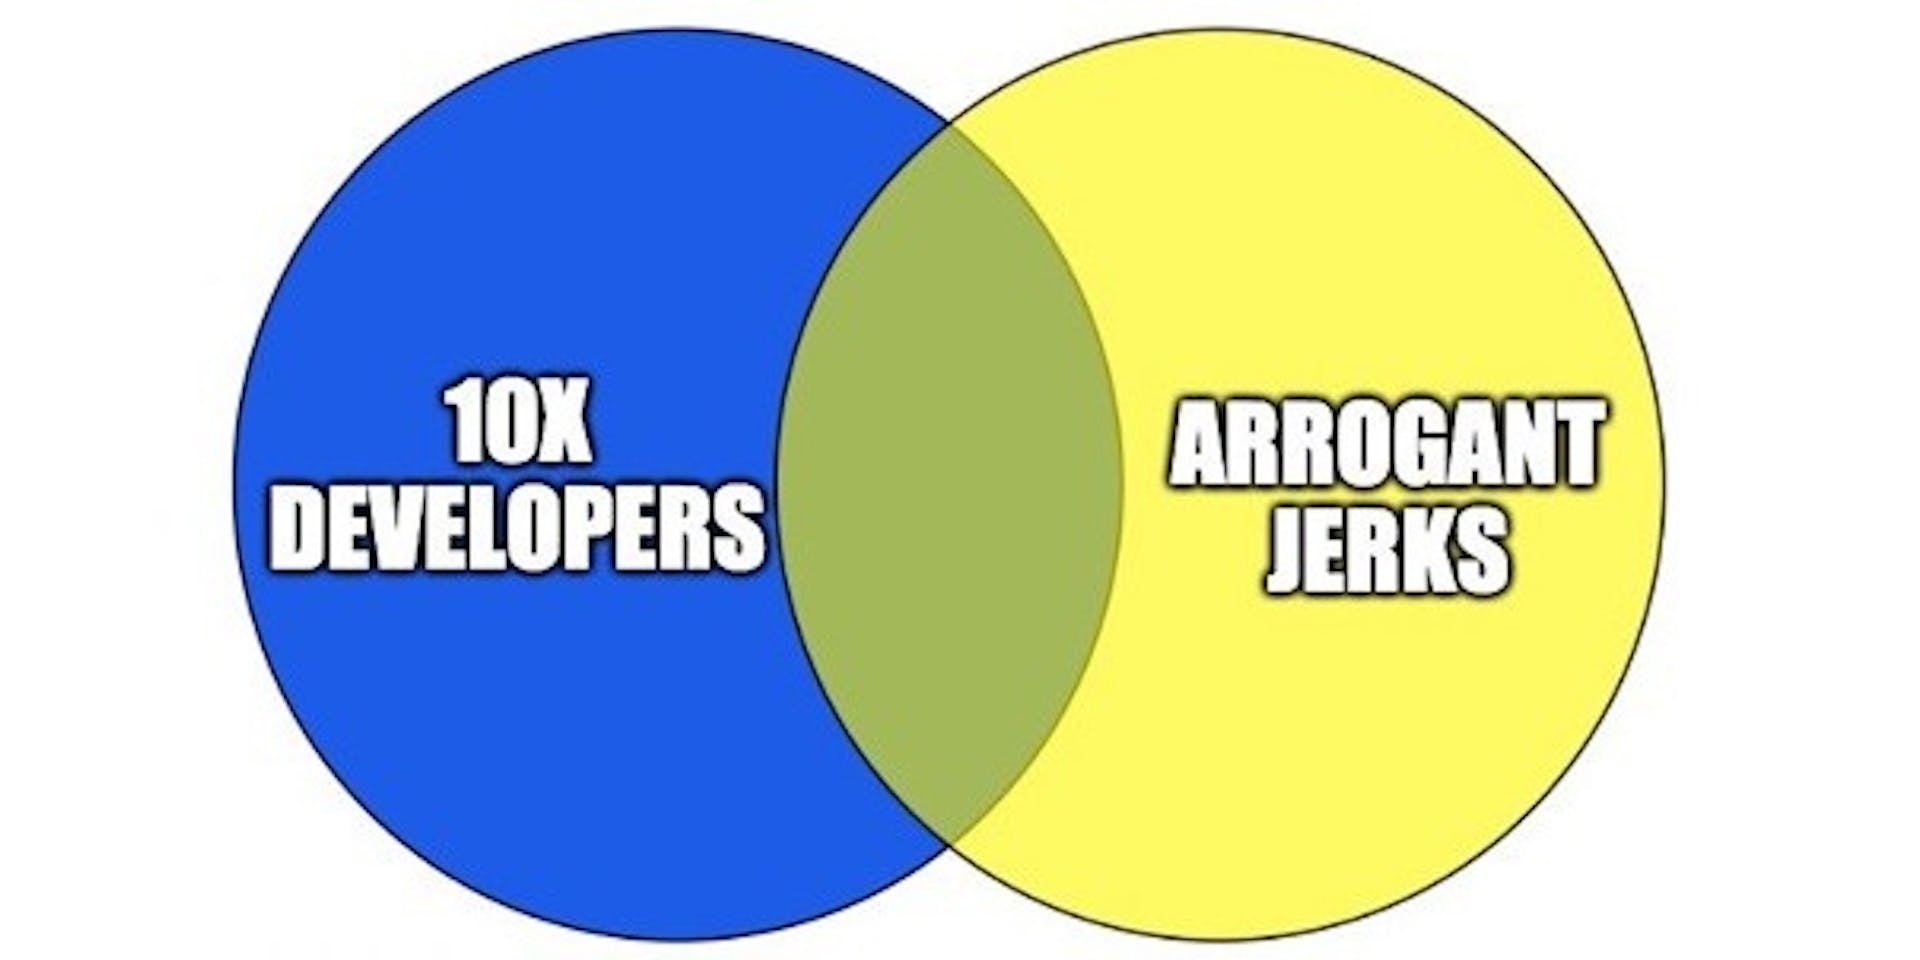 featured image - On 10x Developers and Arrogant Jerks